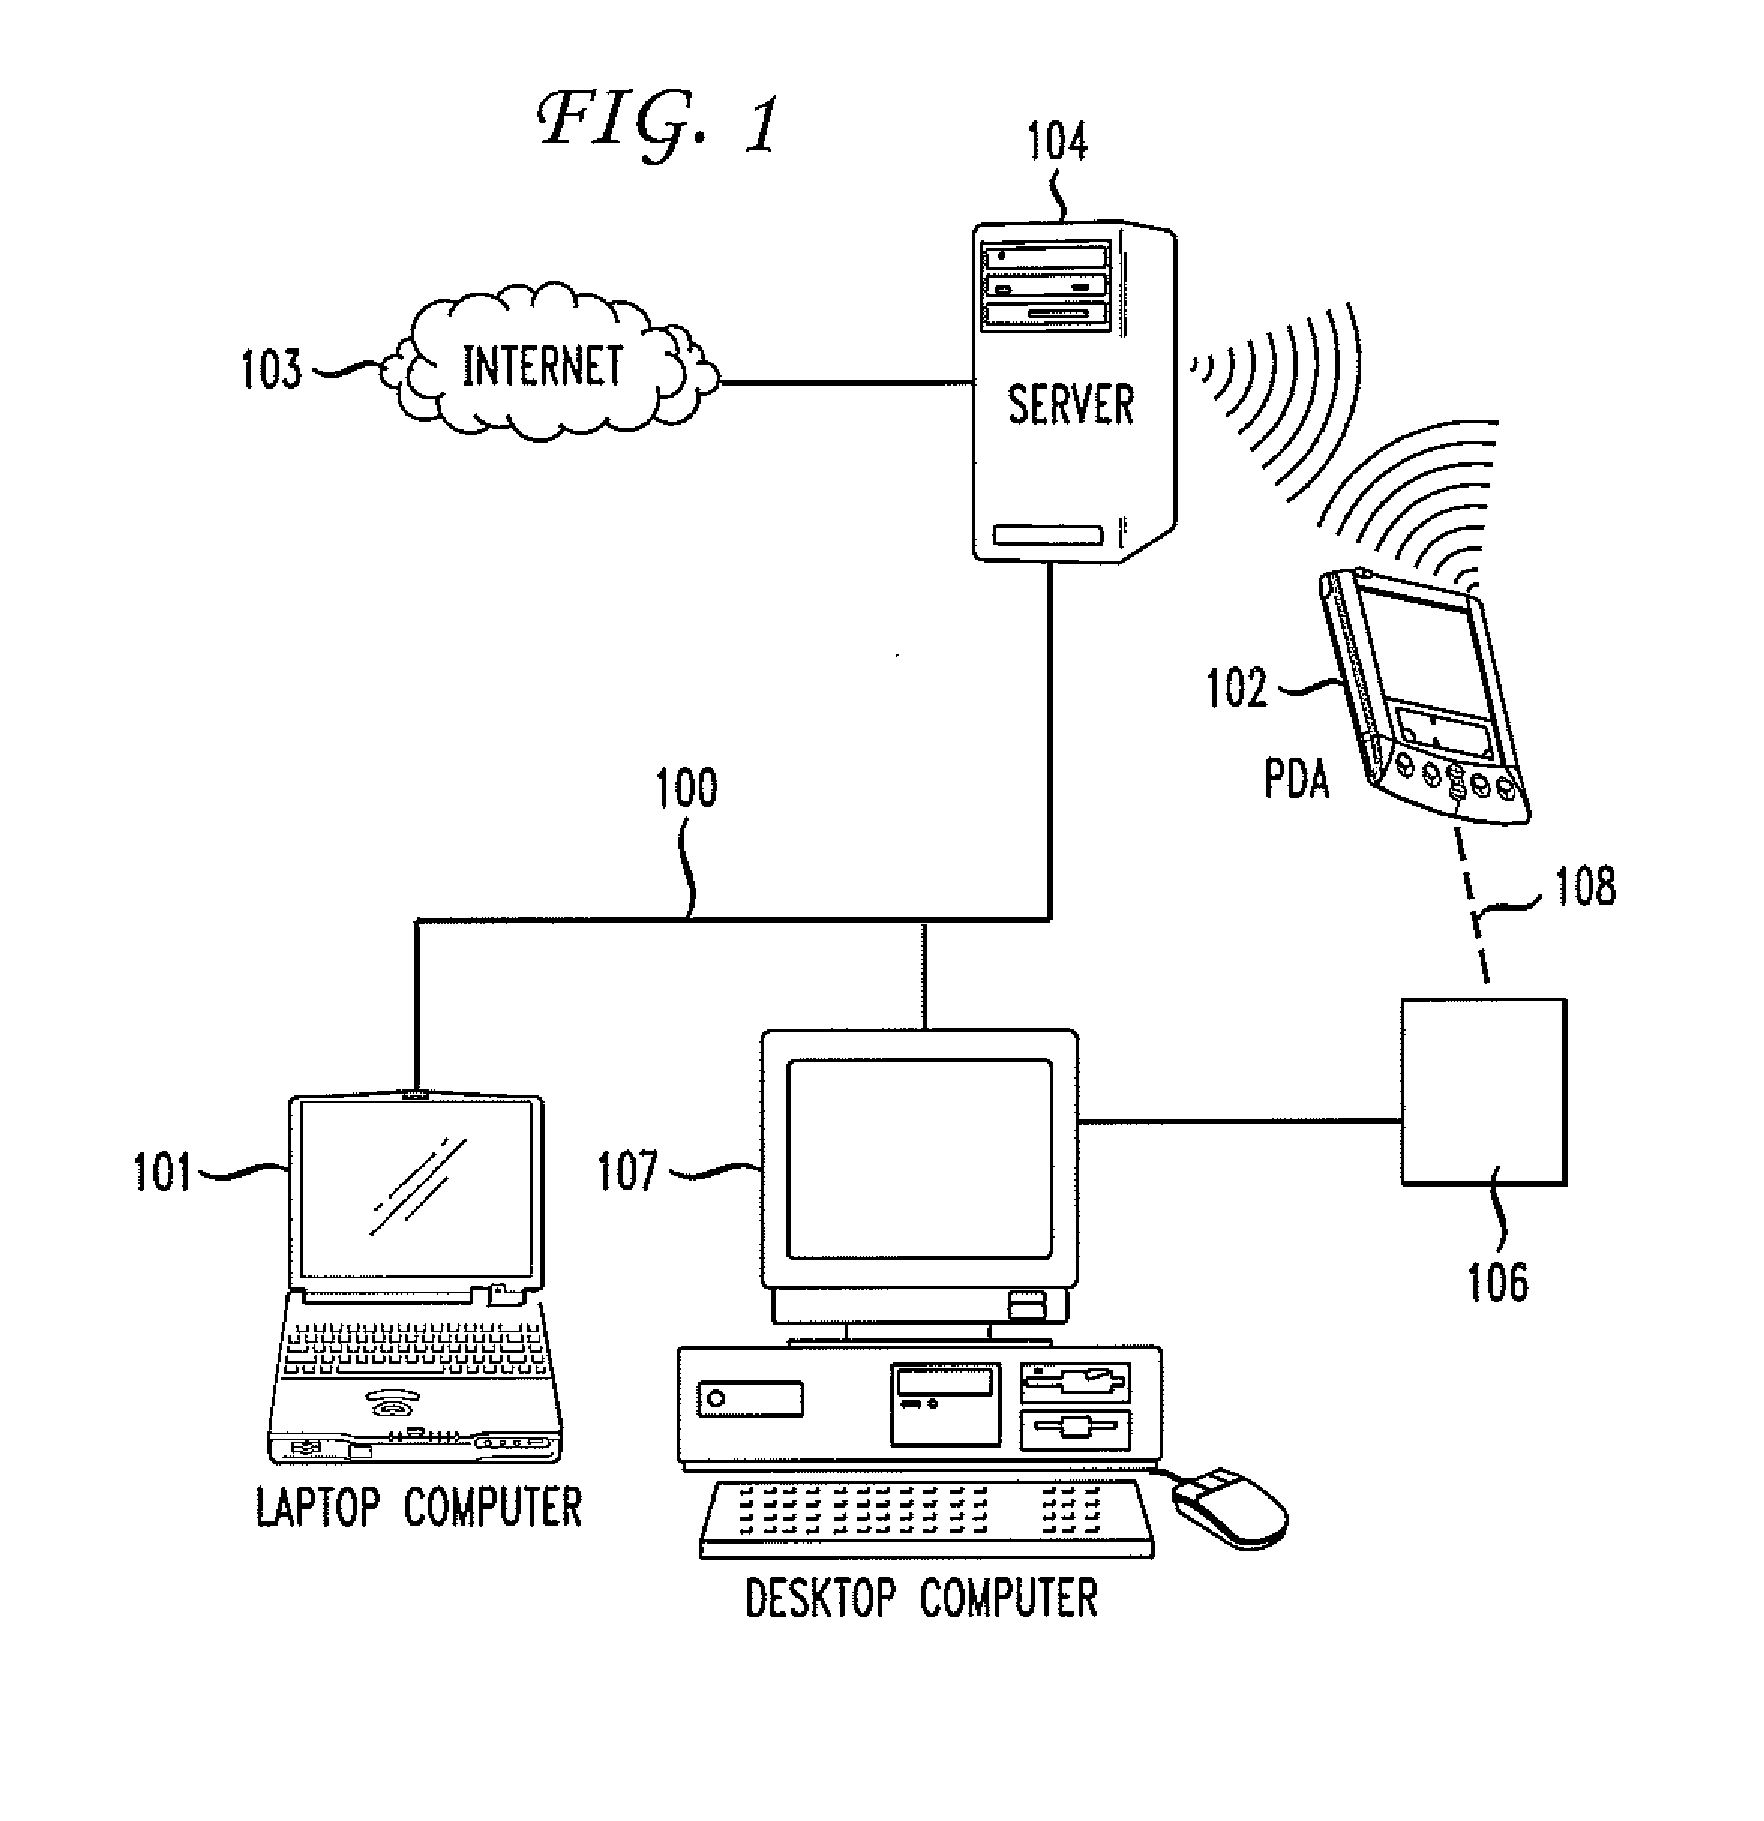 Web-based task assistants for wireless personal devices